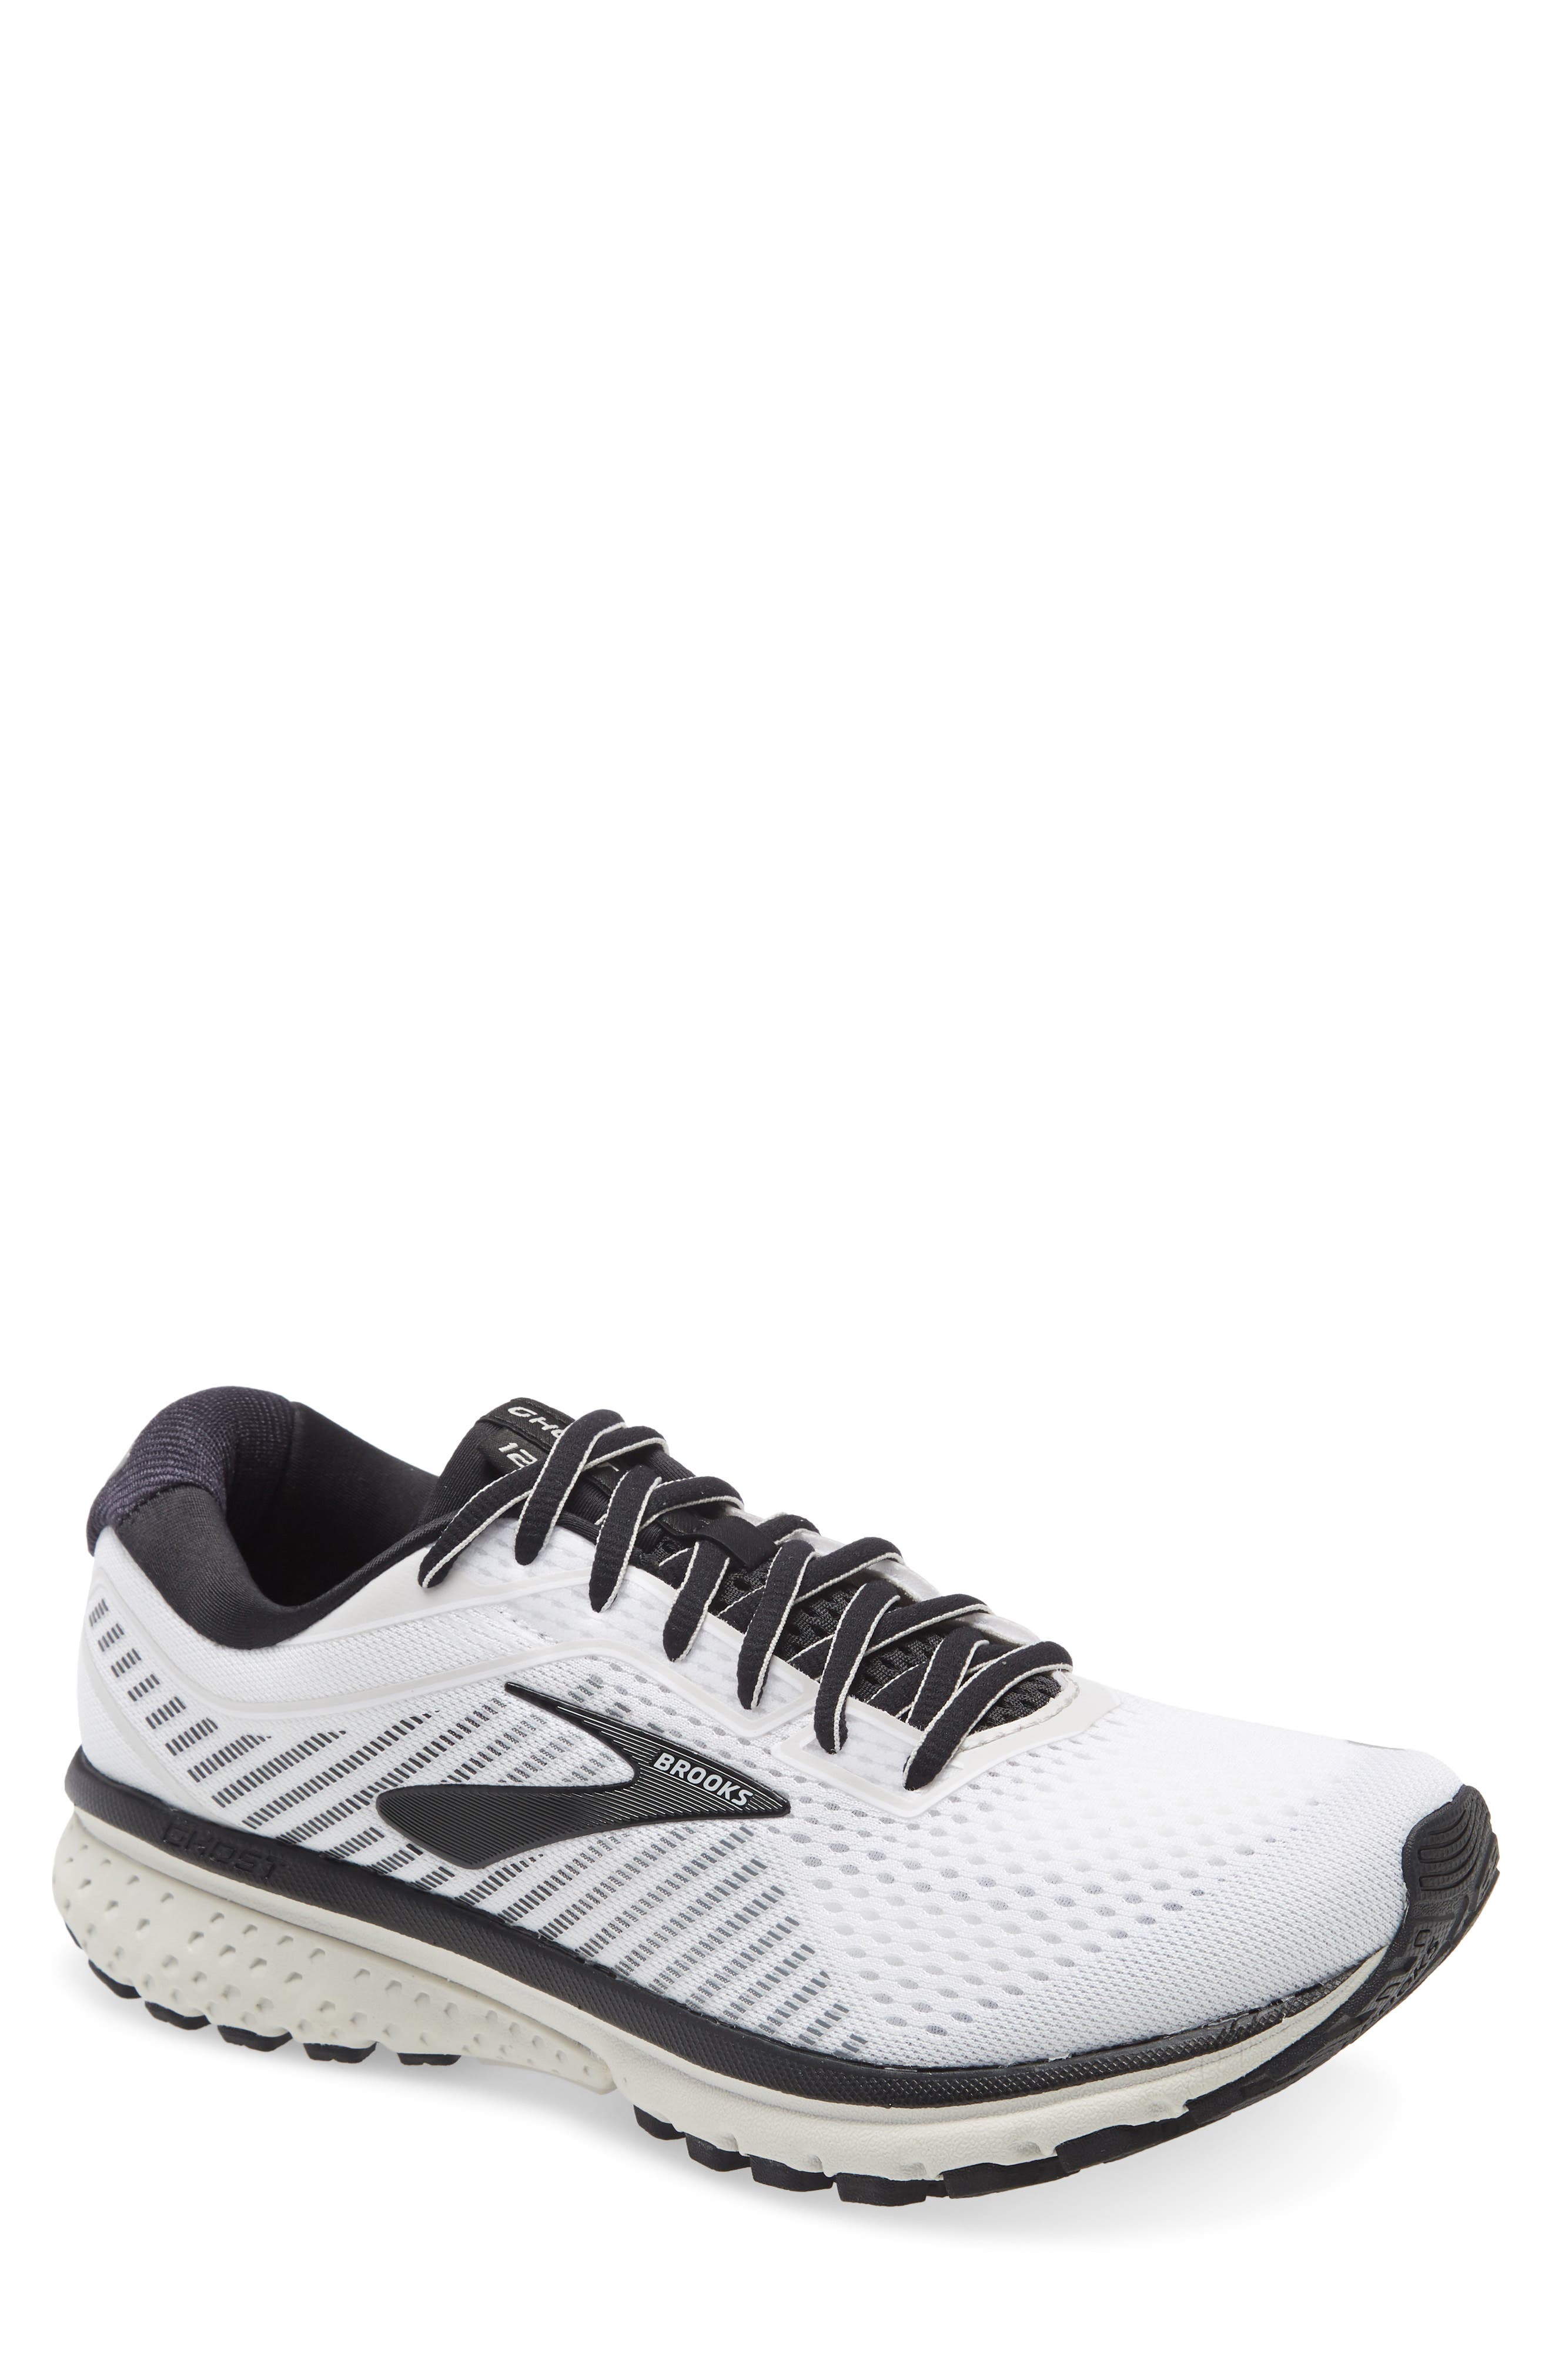 discount mens brooks running shoes